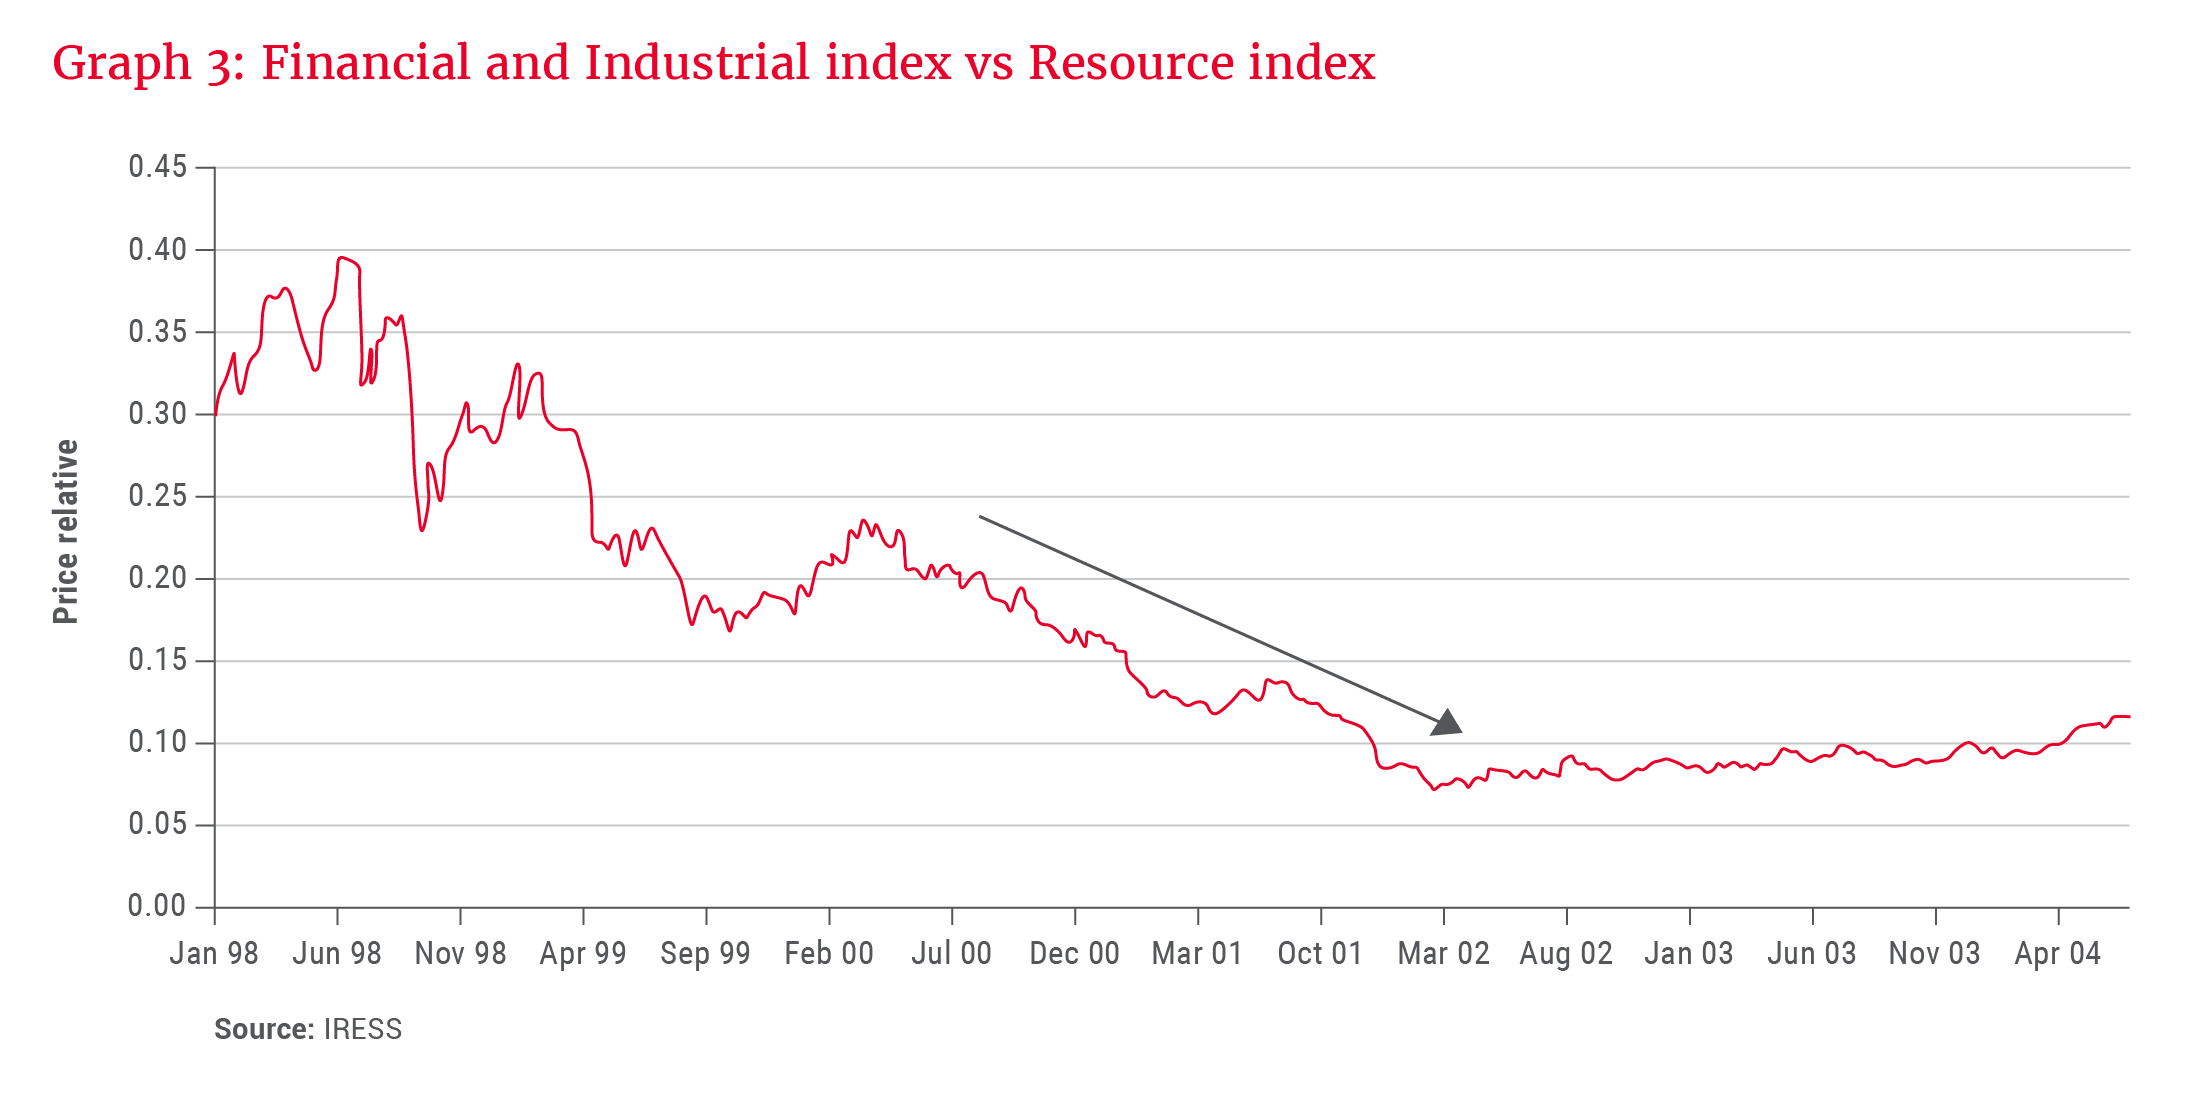 Financial and Industrial index vs Resource index - Allan Gray